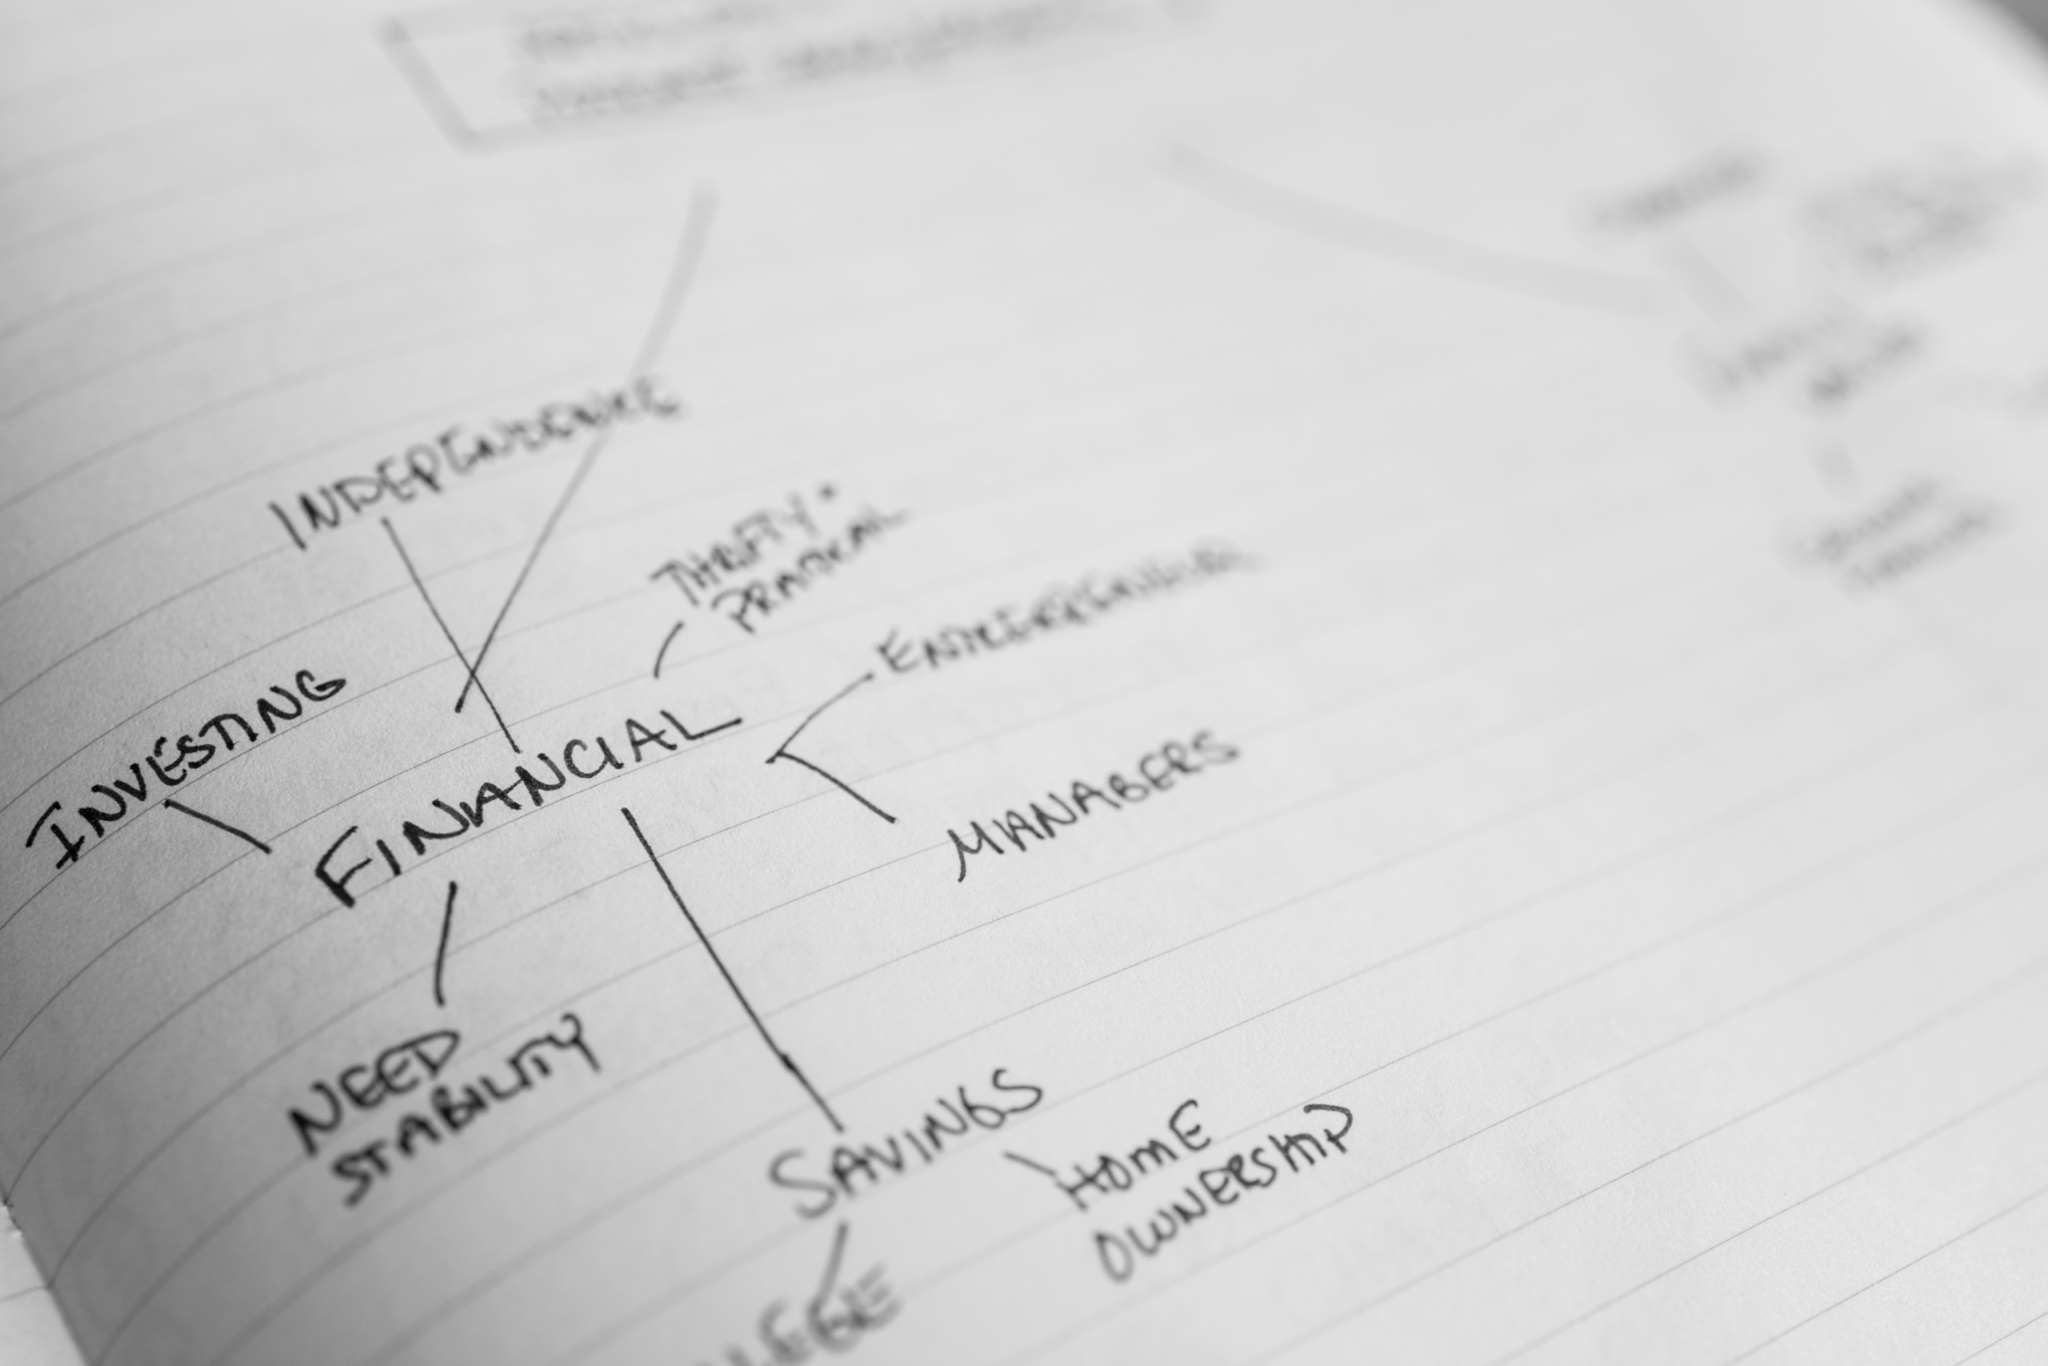 A close-up photo of a business plan